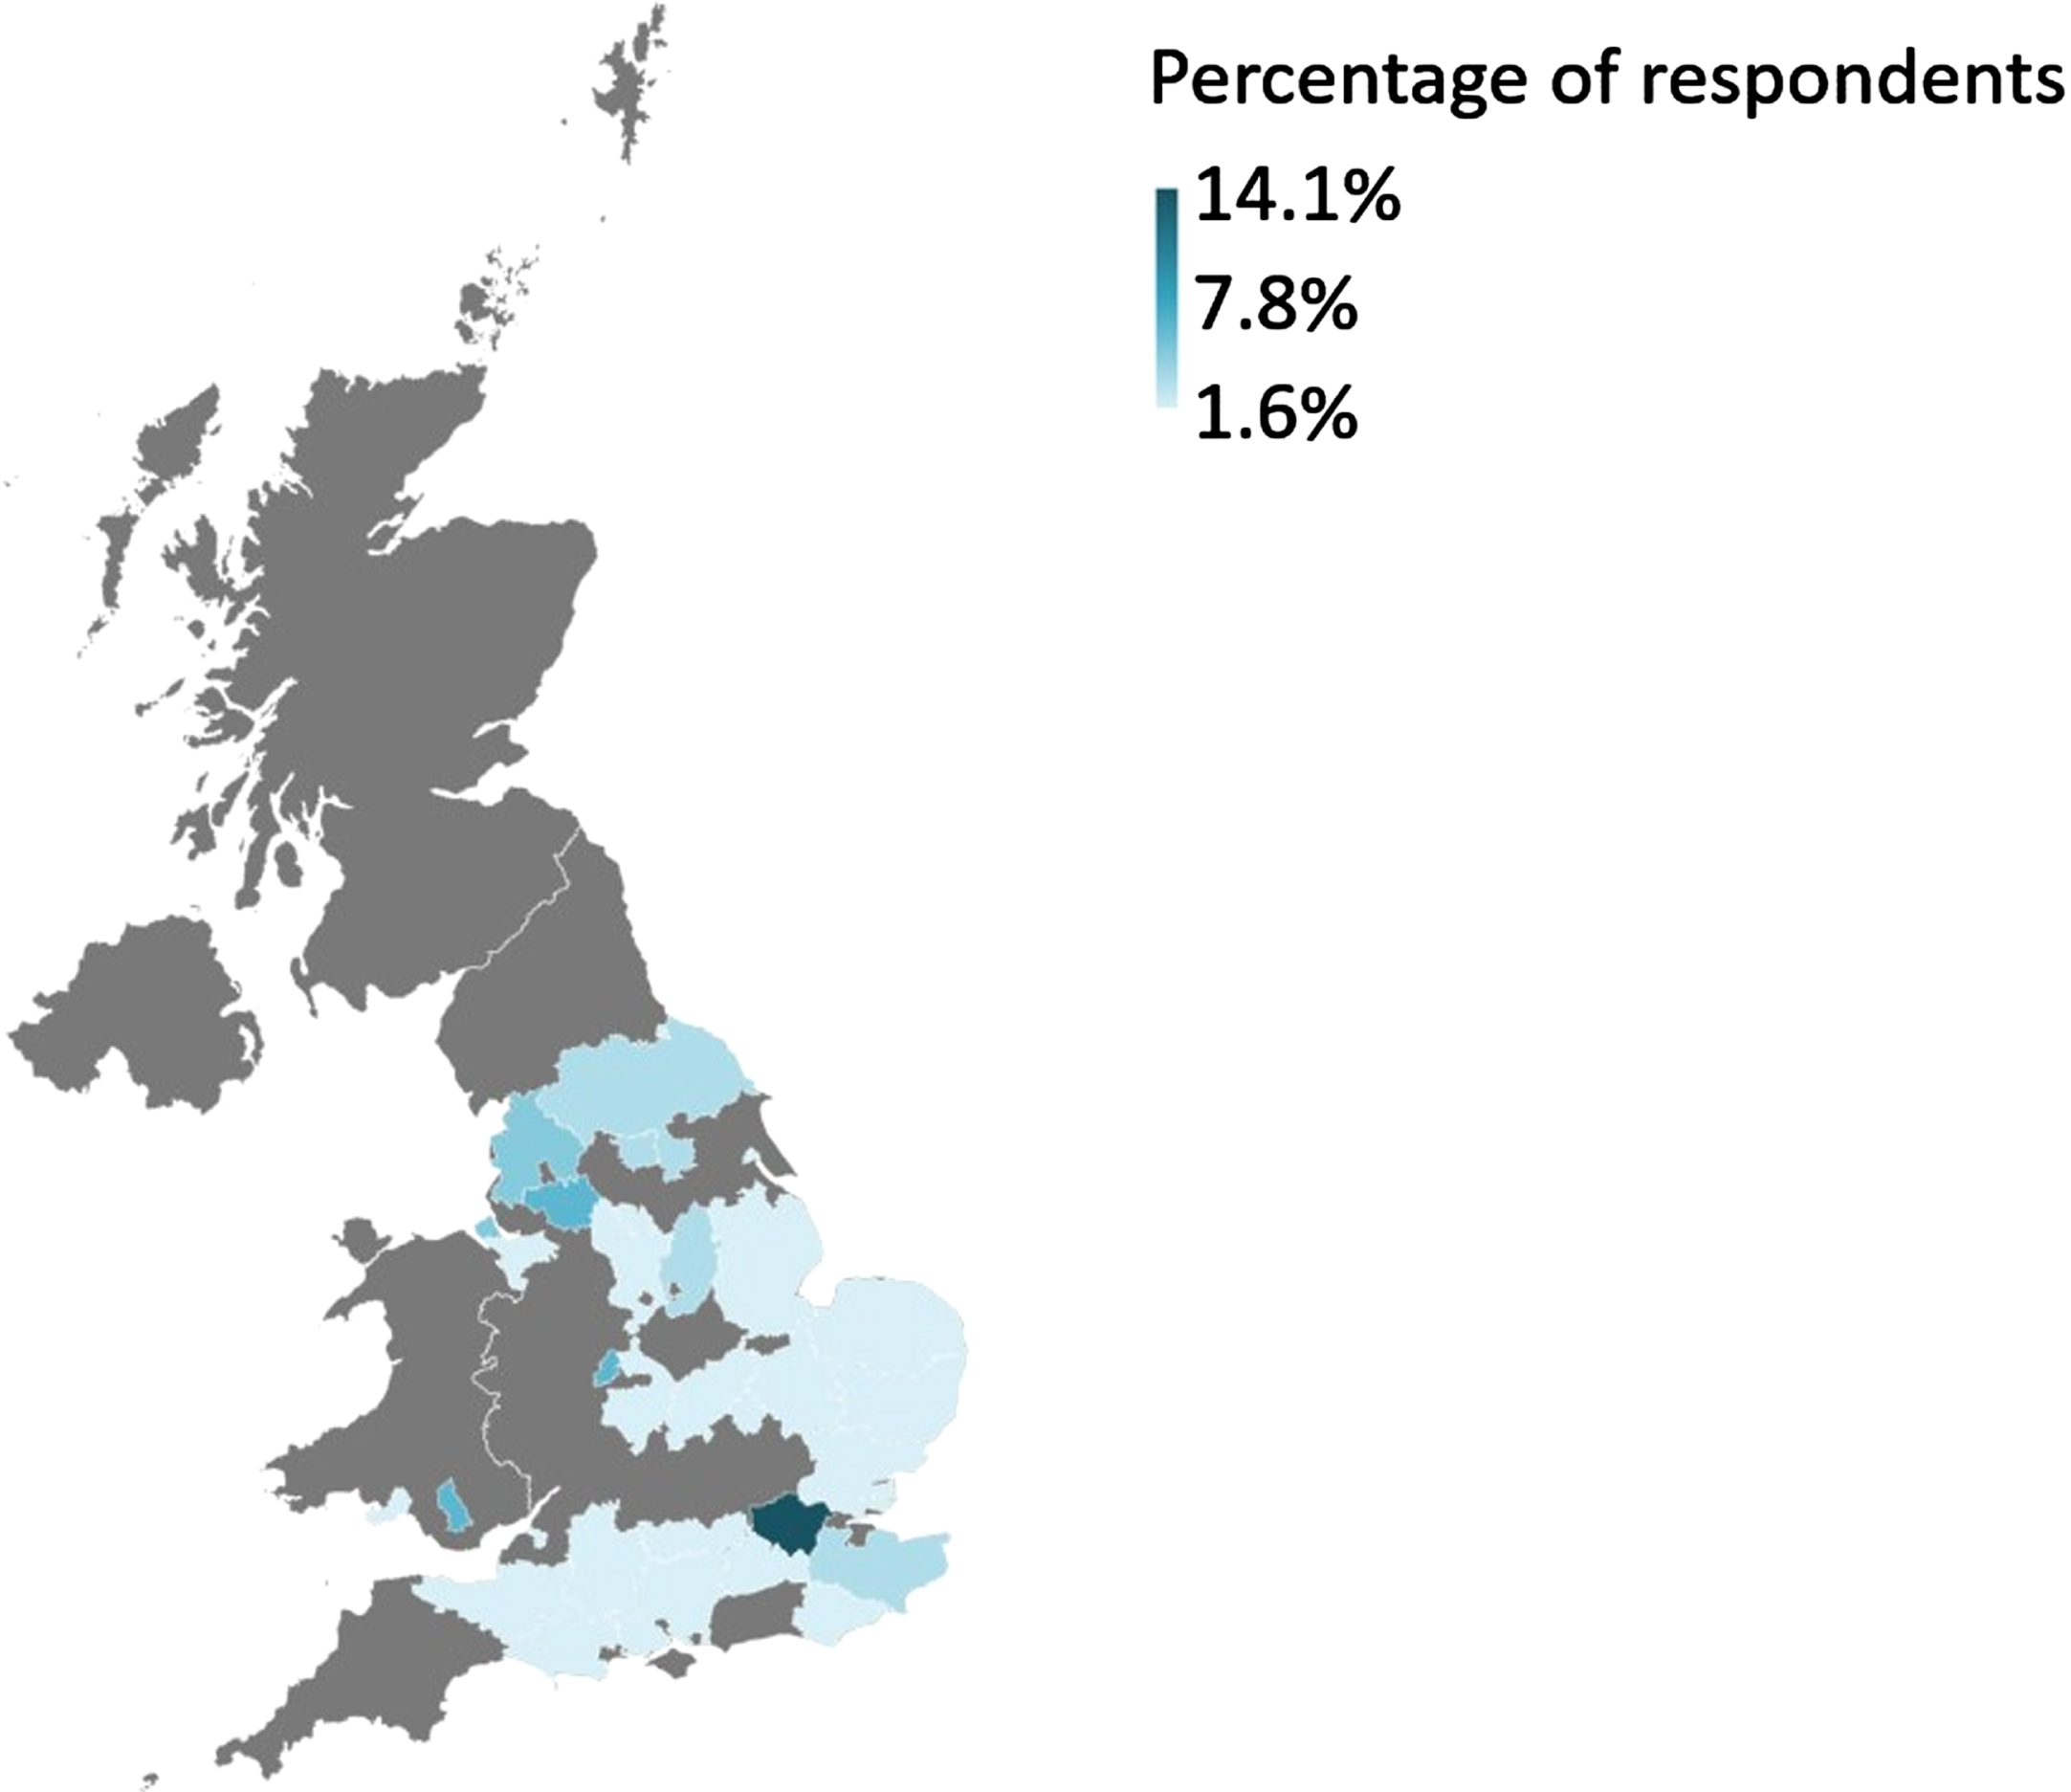 Map of the distribution of hospital or NHS Trust respondents by region of the UK.